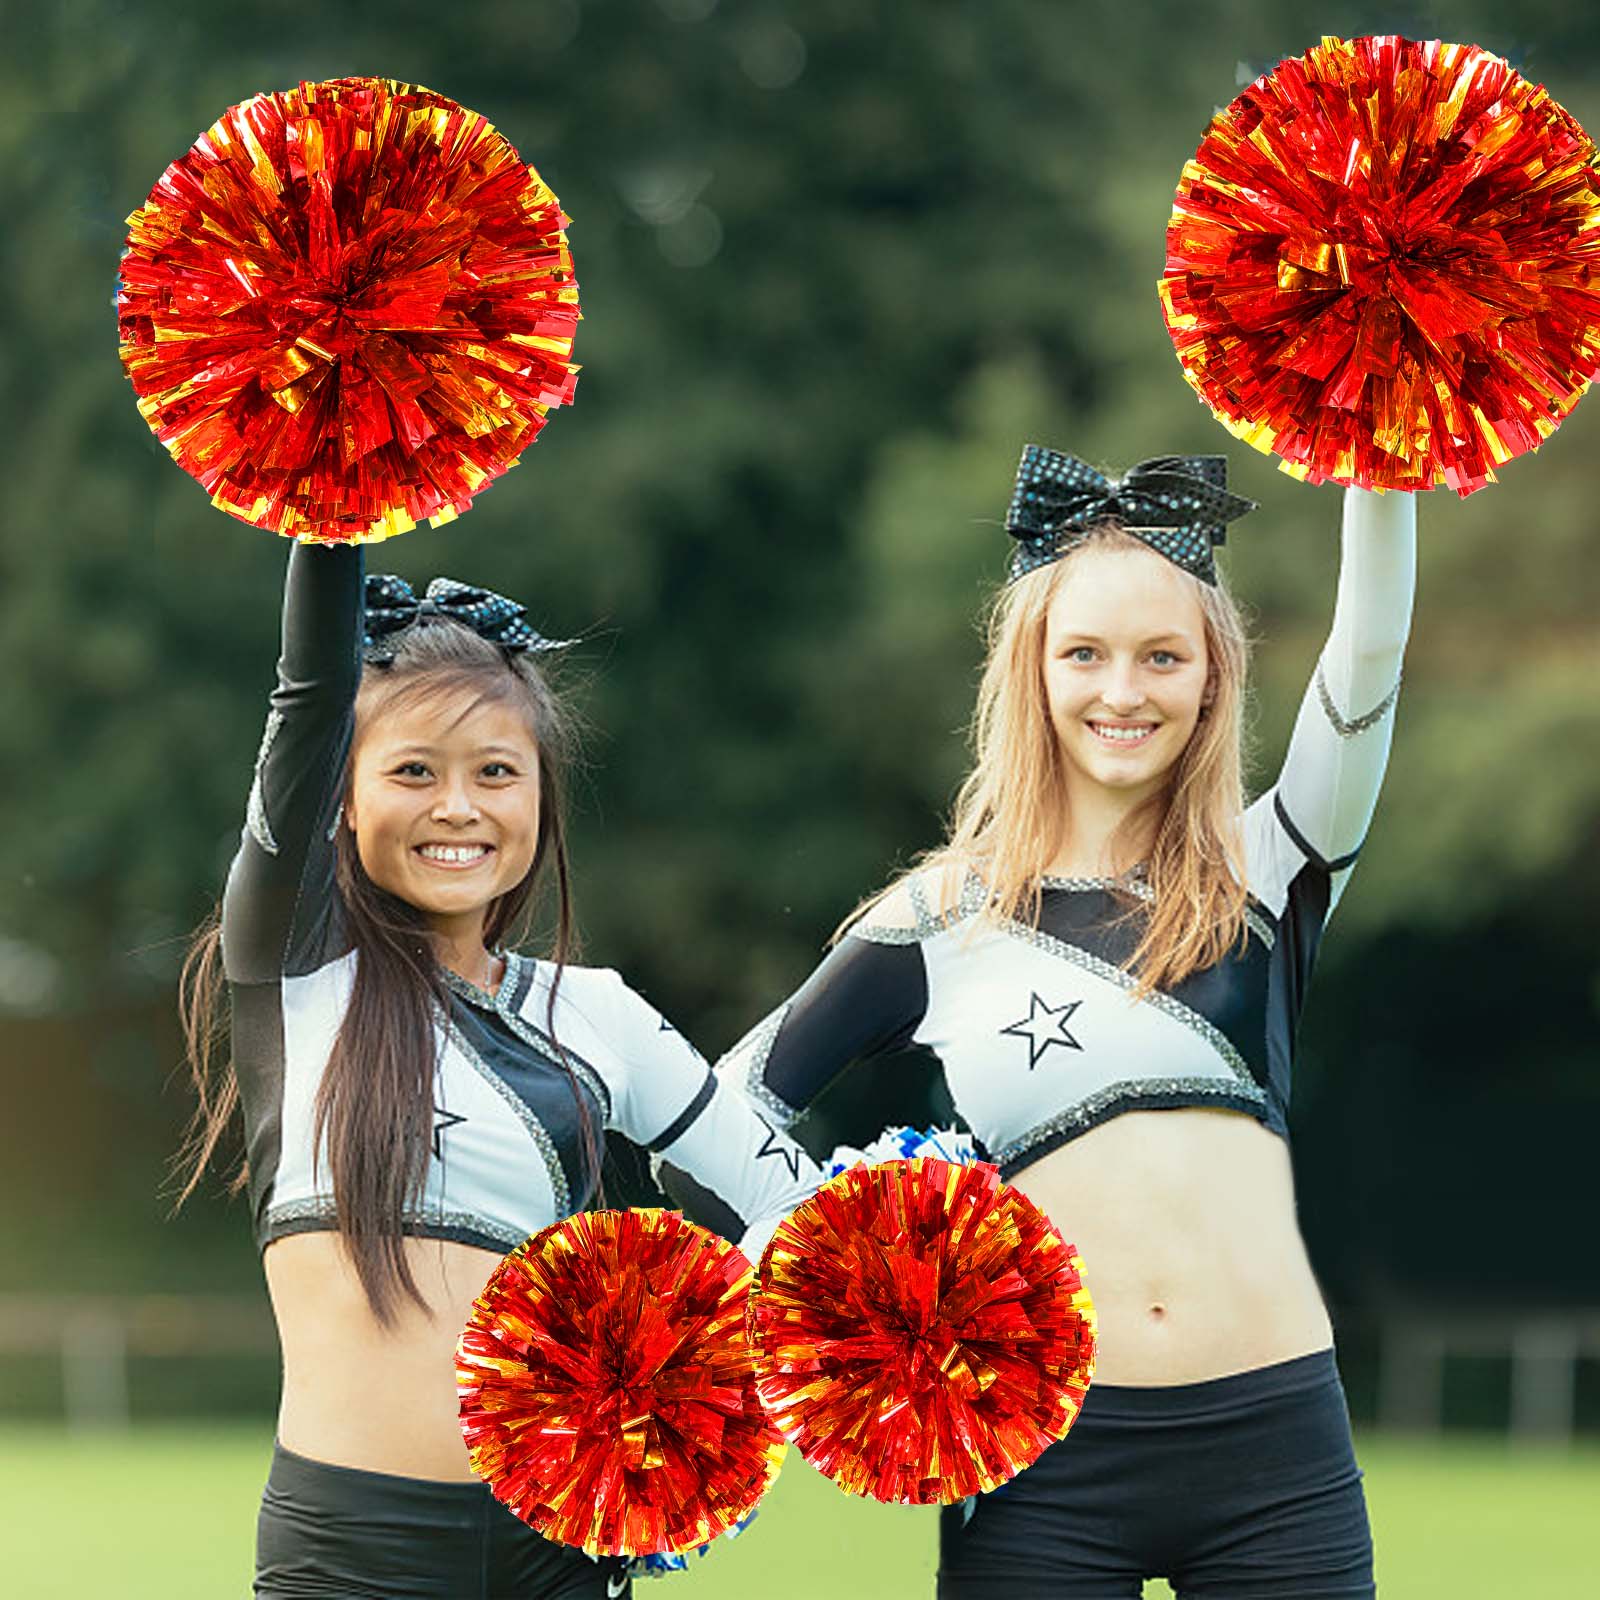  Faxco 12Pack Plastic Pom Poms Cheerleading Pom Poms Sports Dance  Cheer Plastic Pom Pom for Rooters,Cheering Squard,Cheering Team (Black) :  Sports & Outdoors